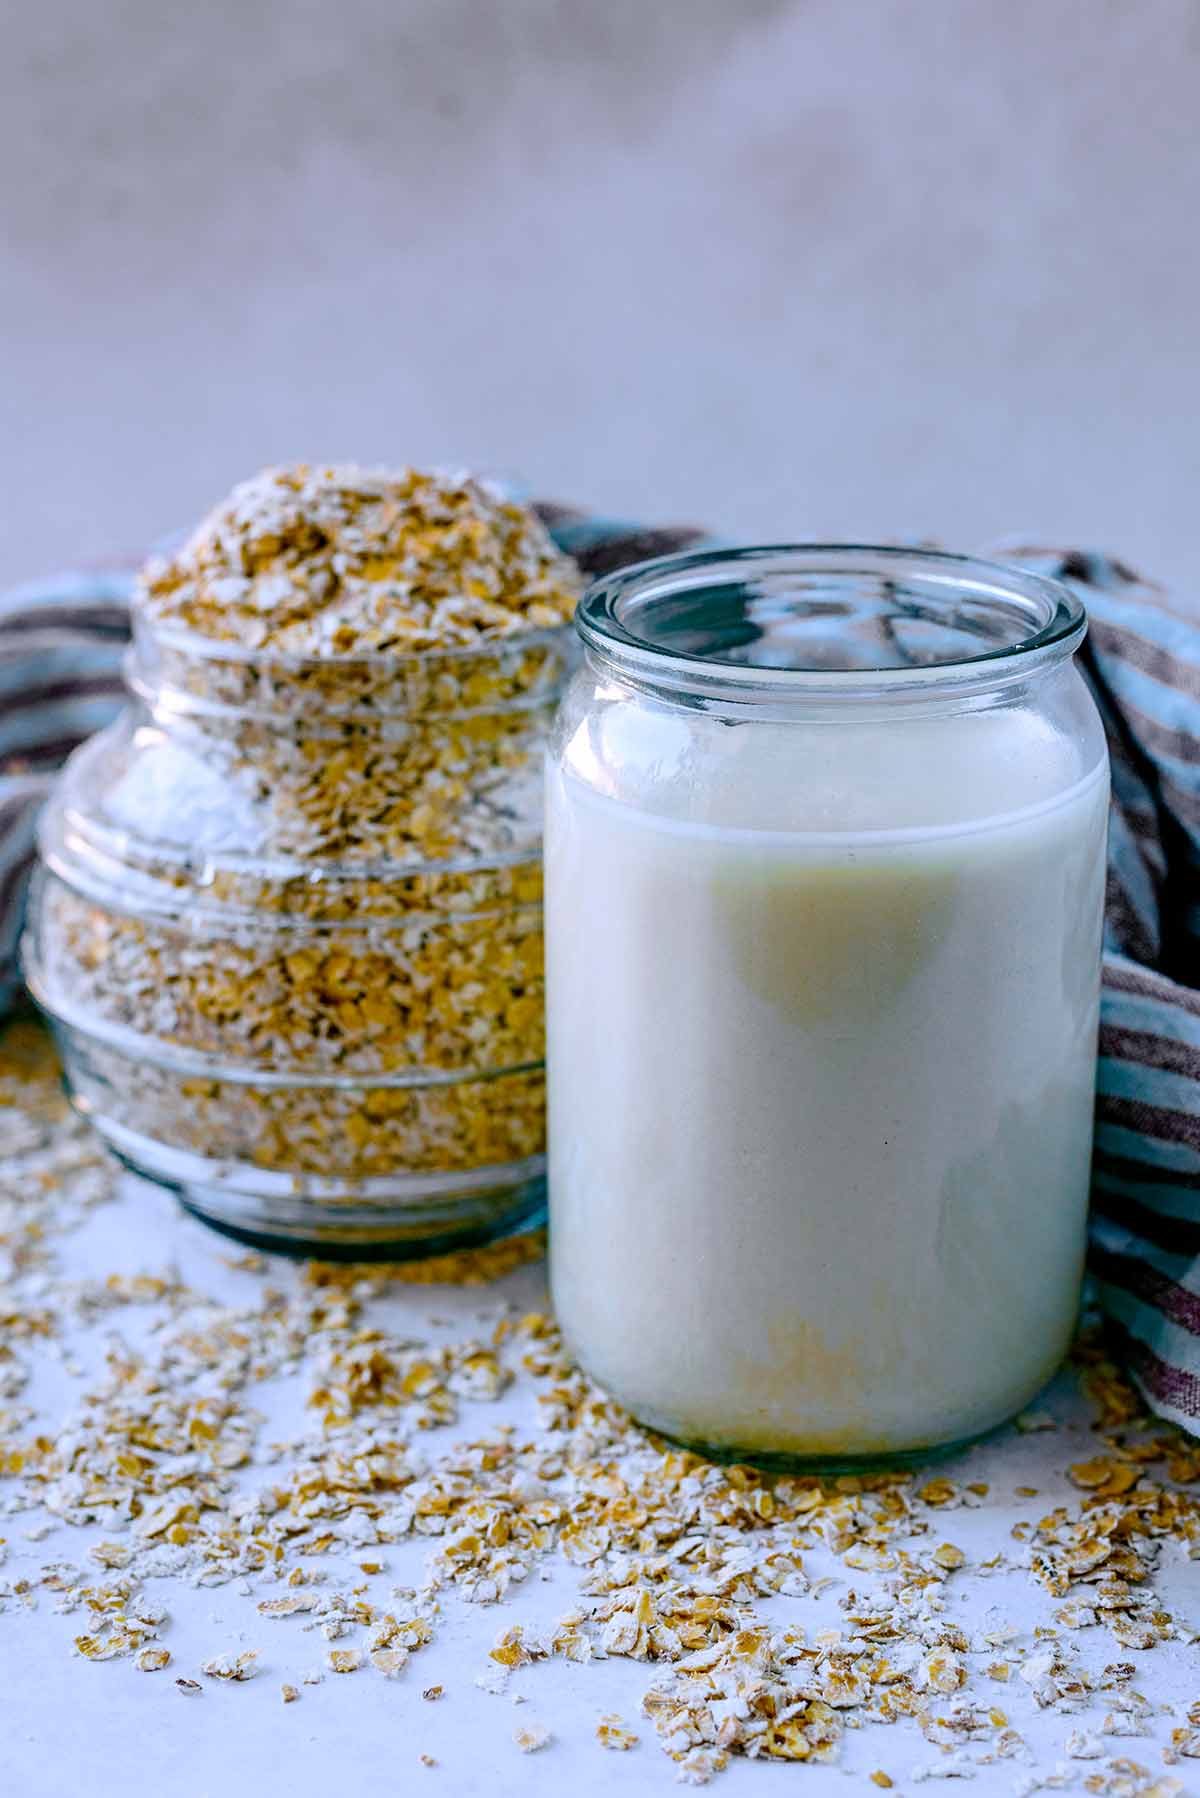 A glass of oat milk in front of a jar of oats.